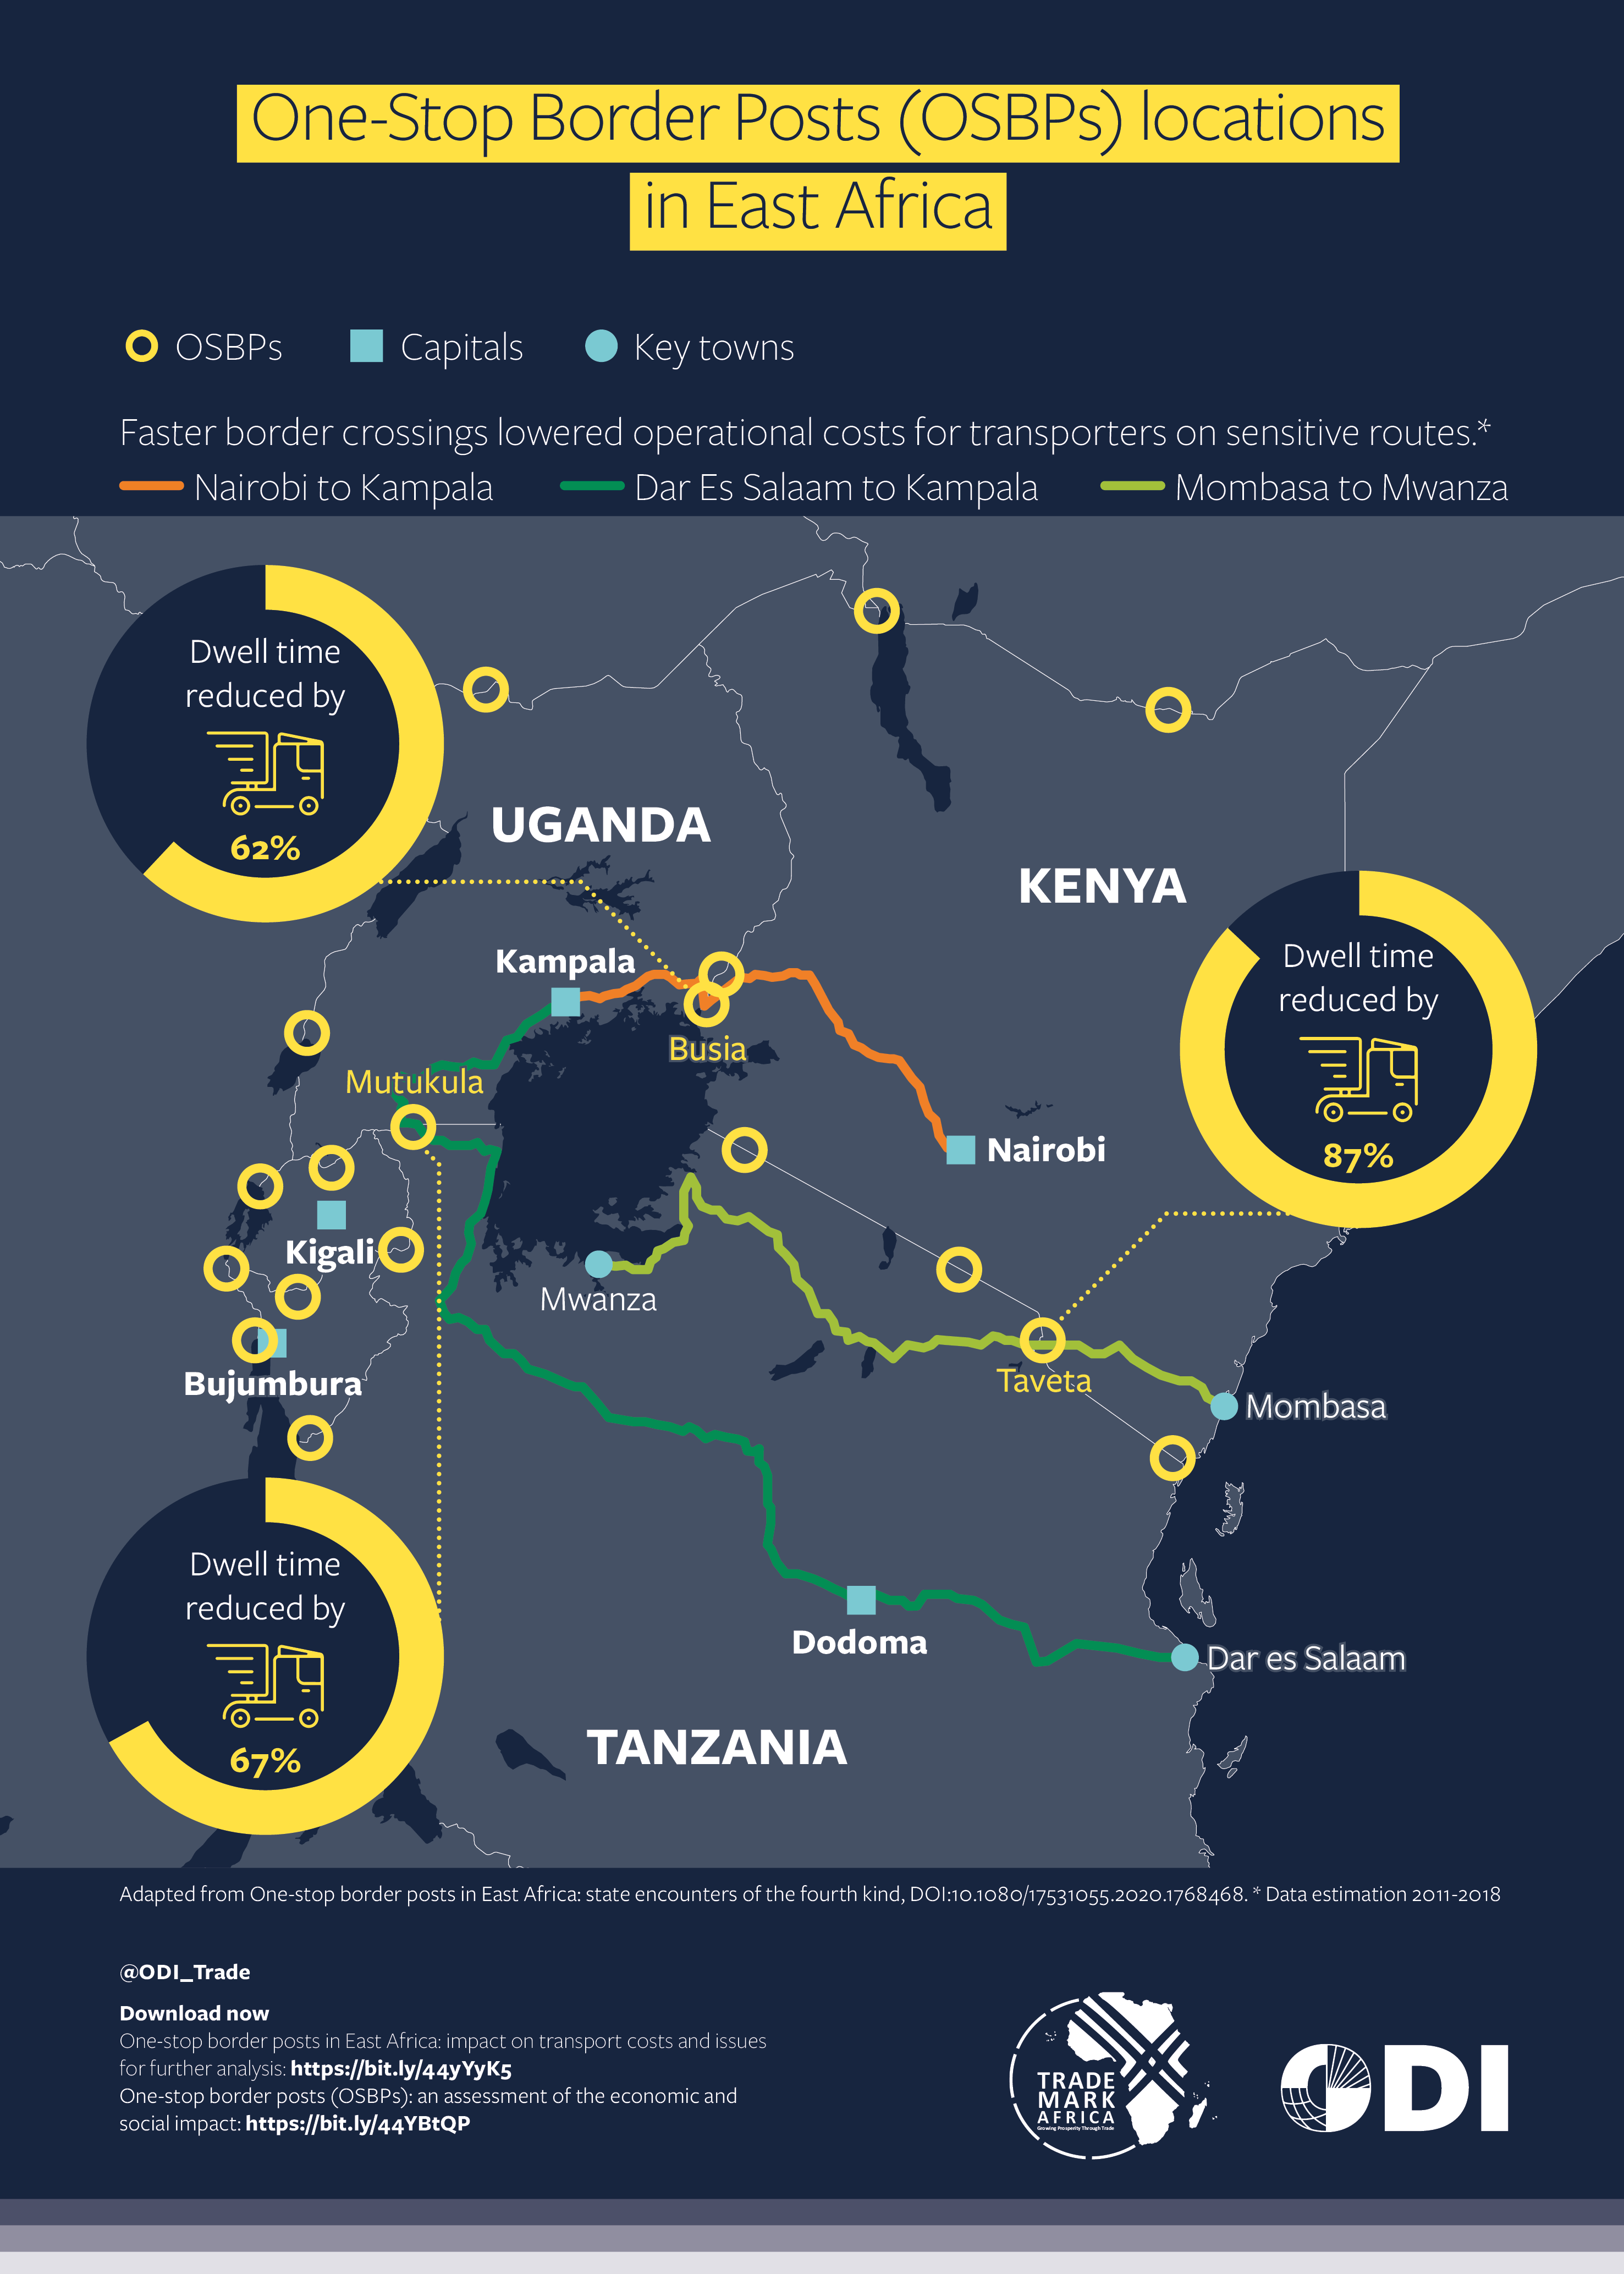 One-stop border posts in East Africa: impact on transport costs and issues for further analysis